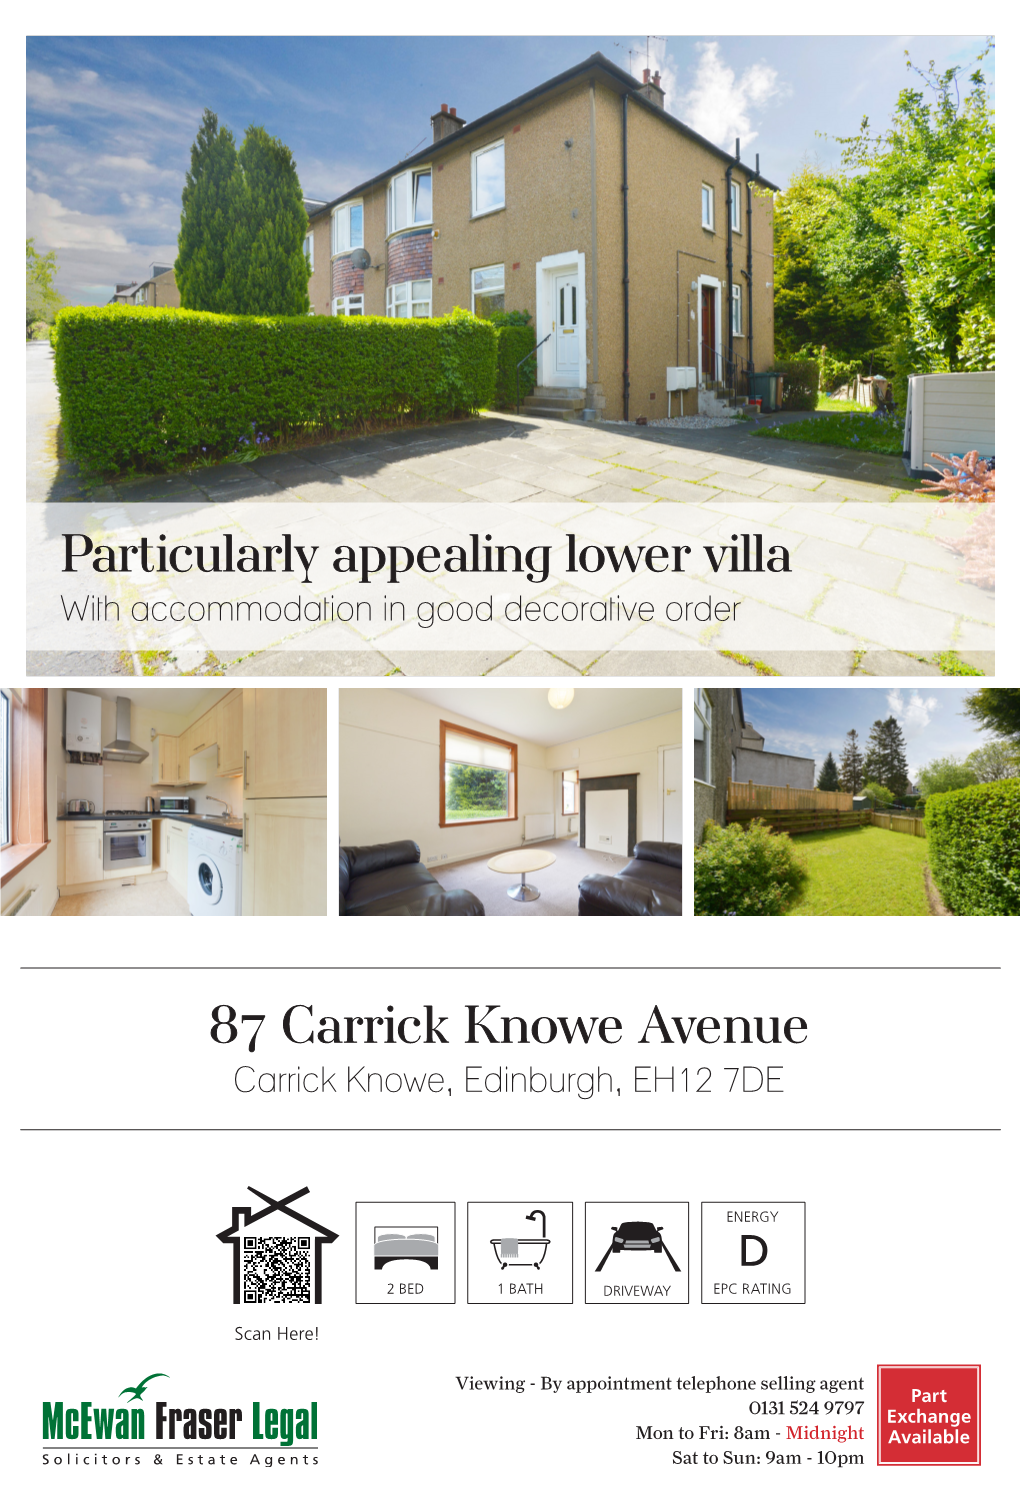 87 Carrick Knowe Avenue Particularly Appealing Lower Villa